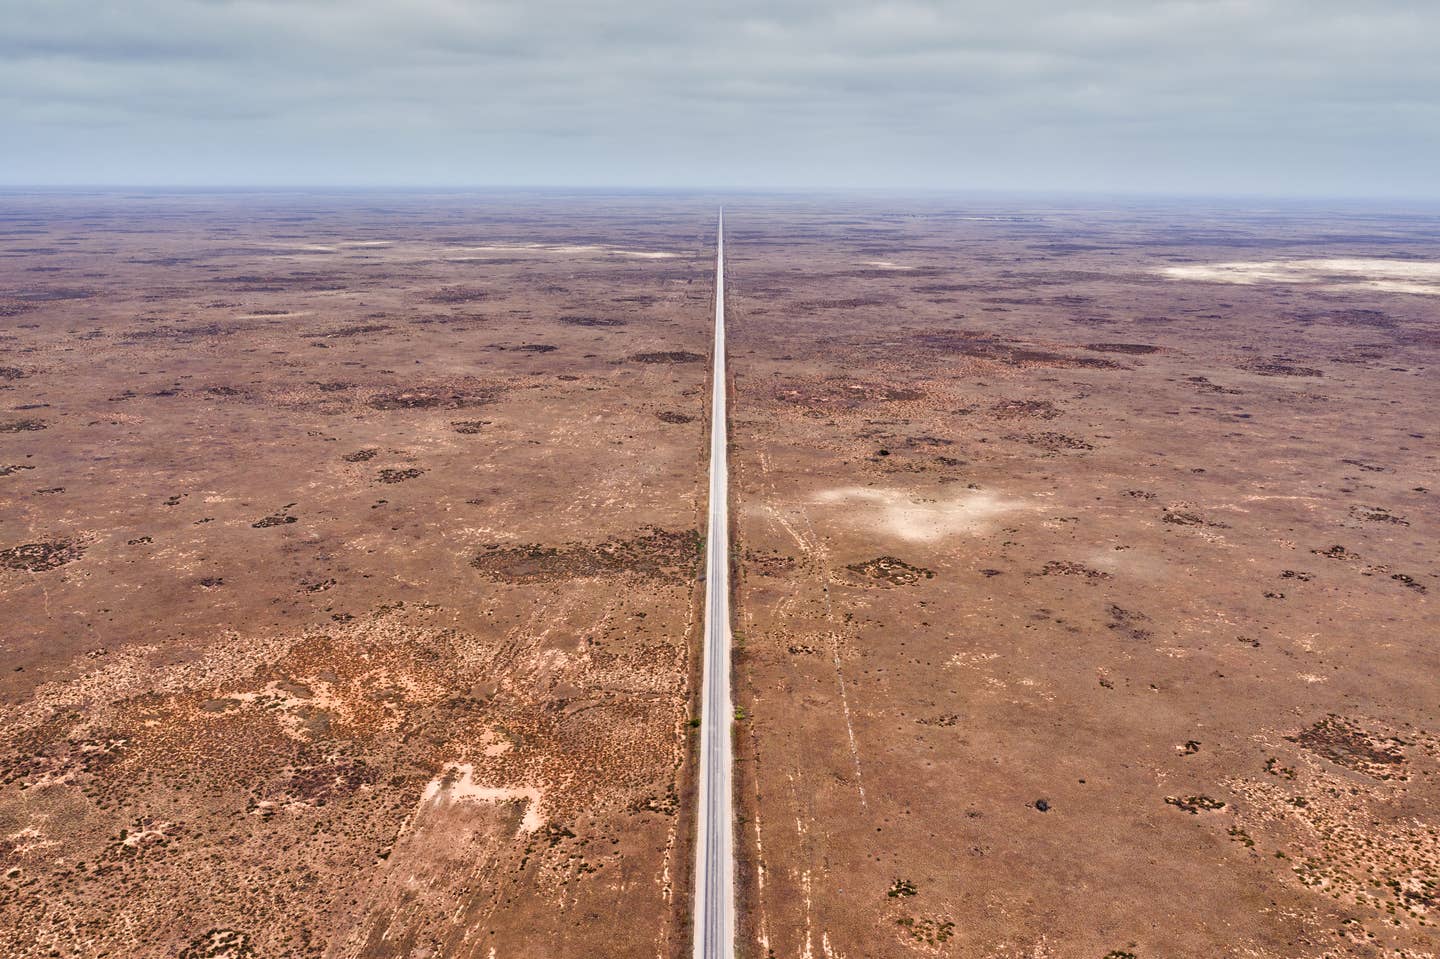 Eyre Highway is an asphalted highway in Australia, with a length of 1,675 km (1041 mi), linking Western Australia and South Australia via the Nullarbor Plain.